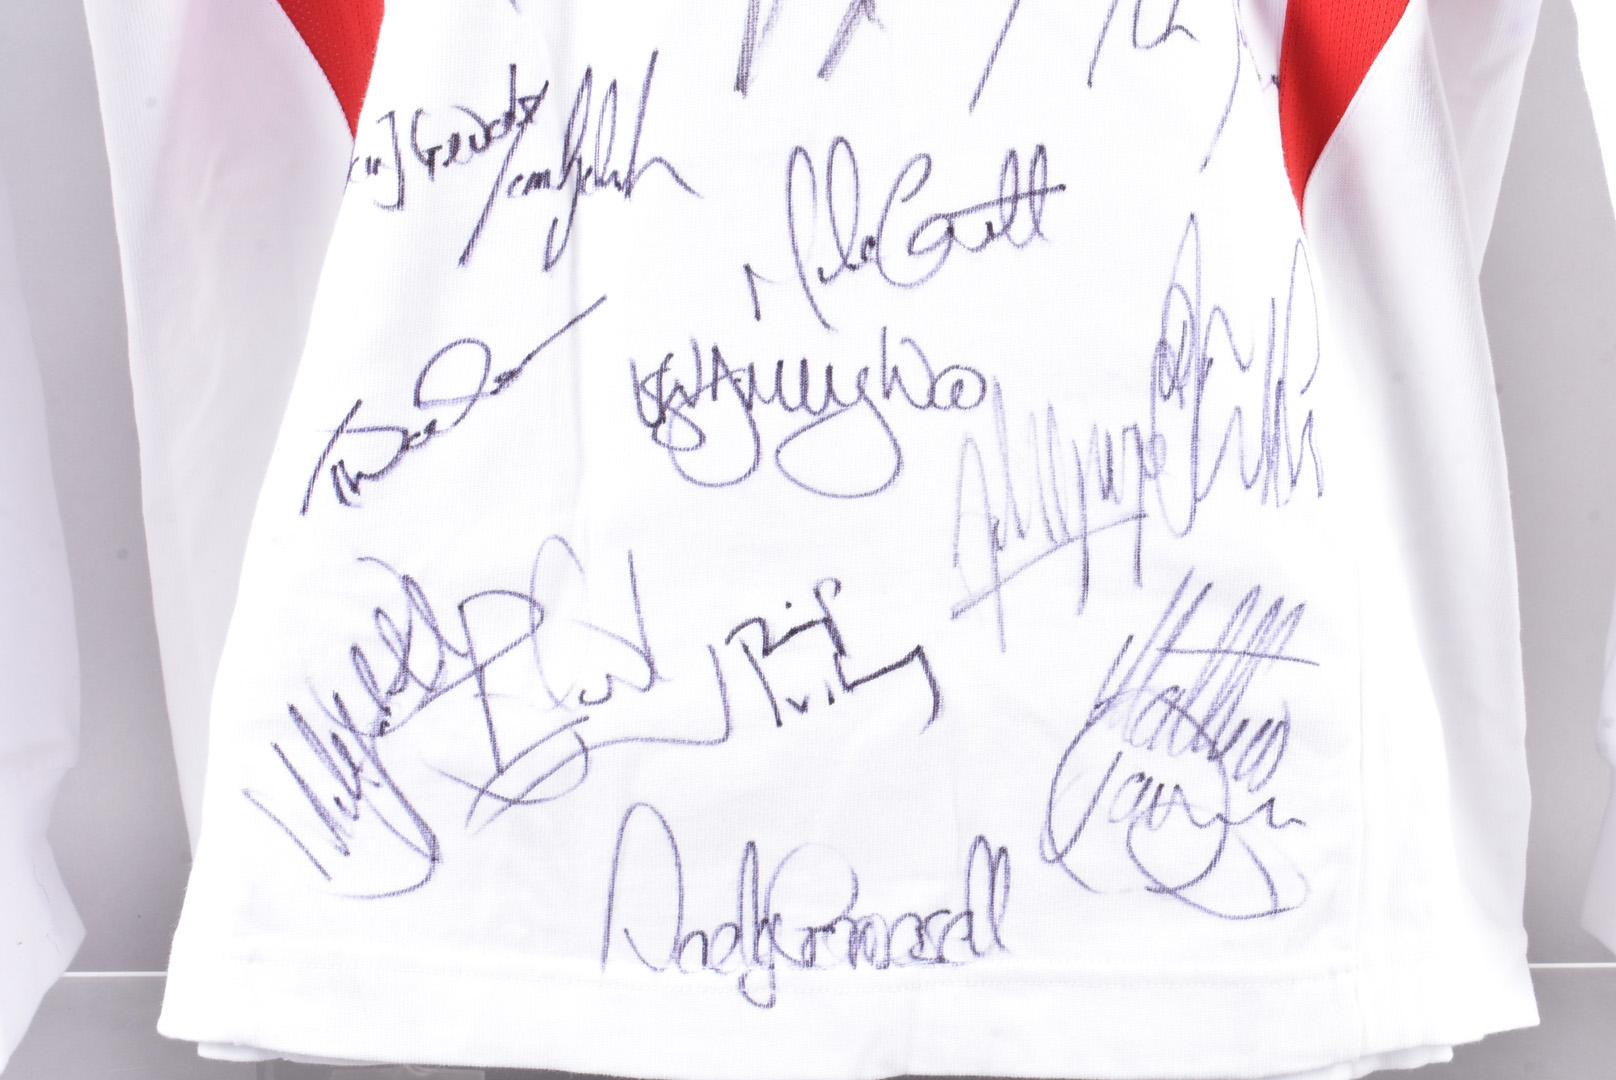 England 2003 Rugby World Cup Winners signed shirt, comprising are Iain Balshaw, Ben Cohen, Josh - Image 4 of 4